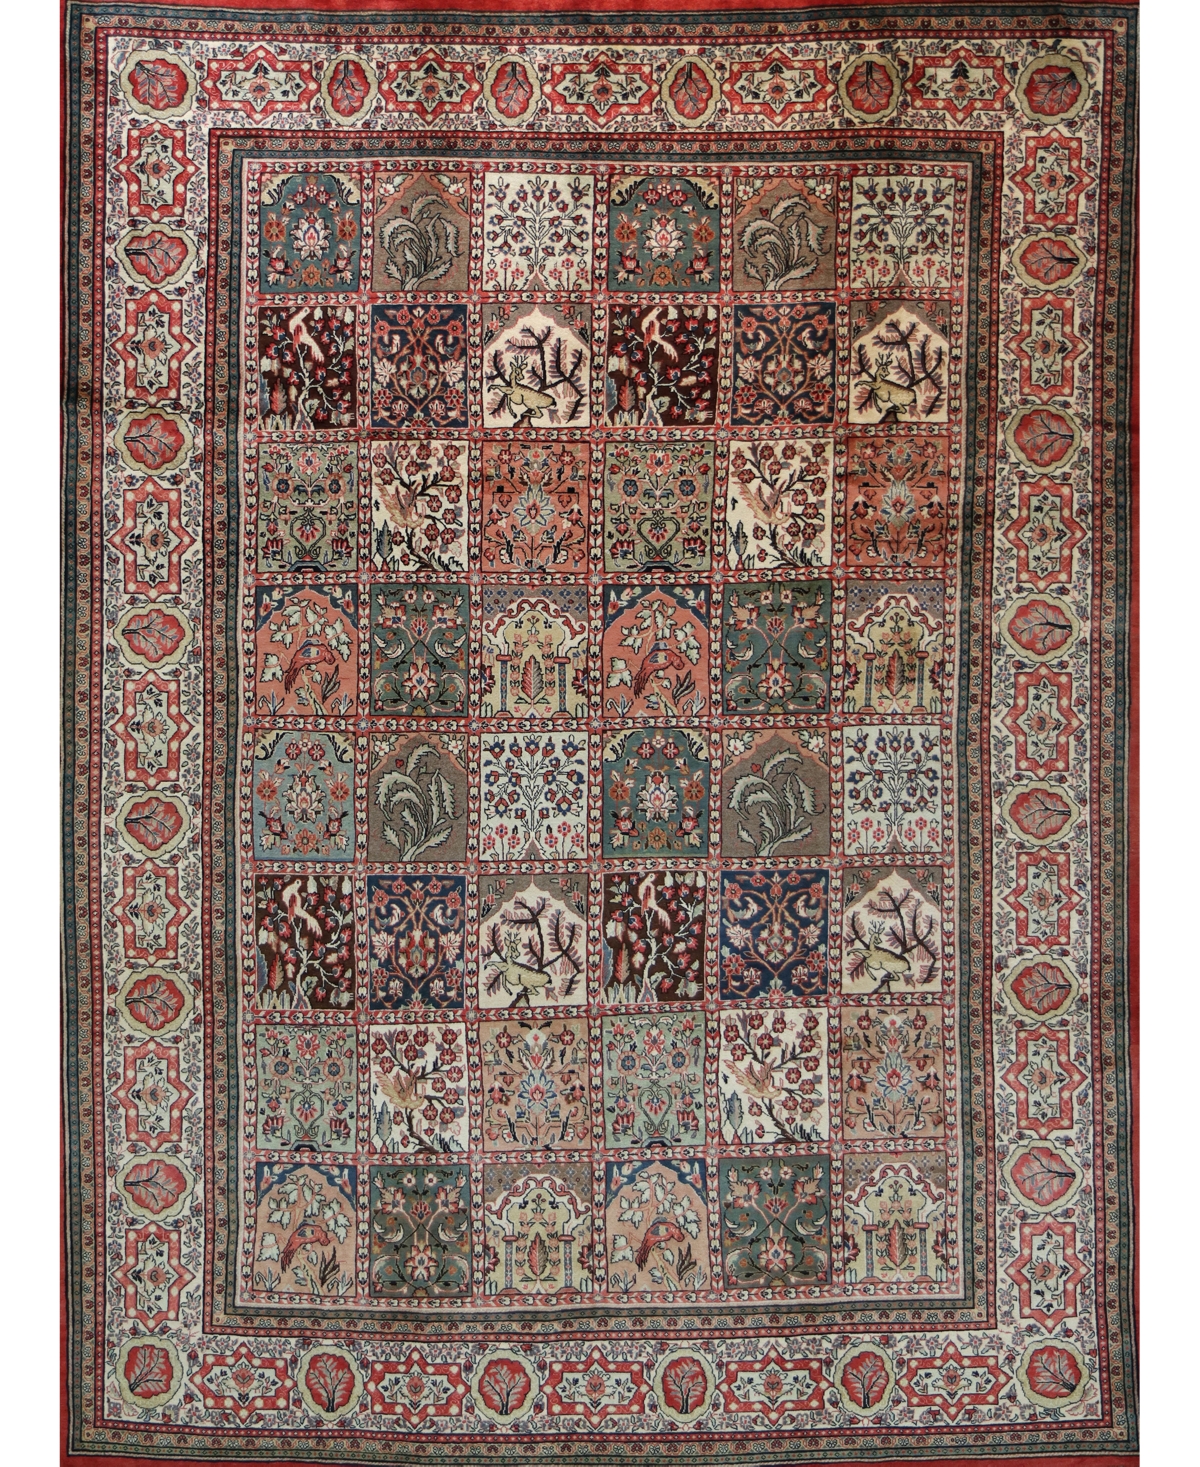 Bb Rugs One Of A Kind Sarouk 9'6" X 13'1" Area Rug In Multi